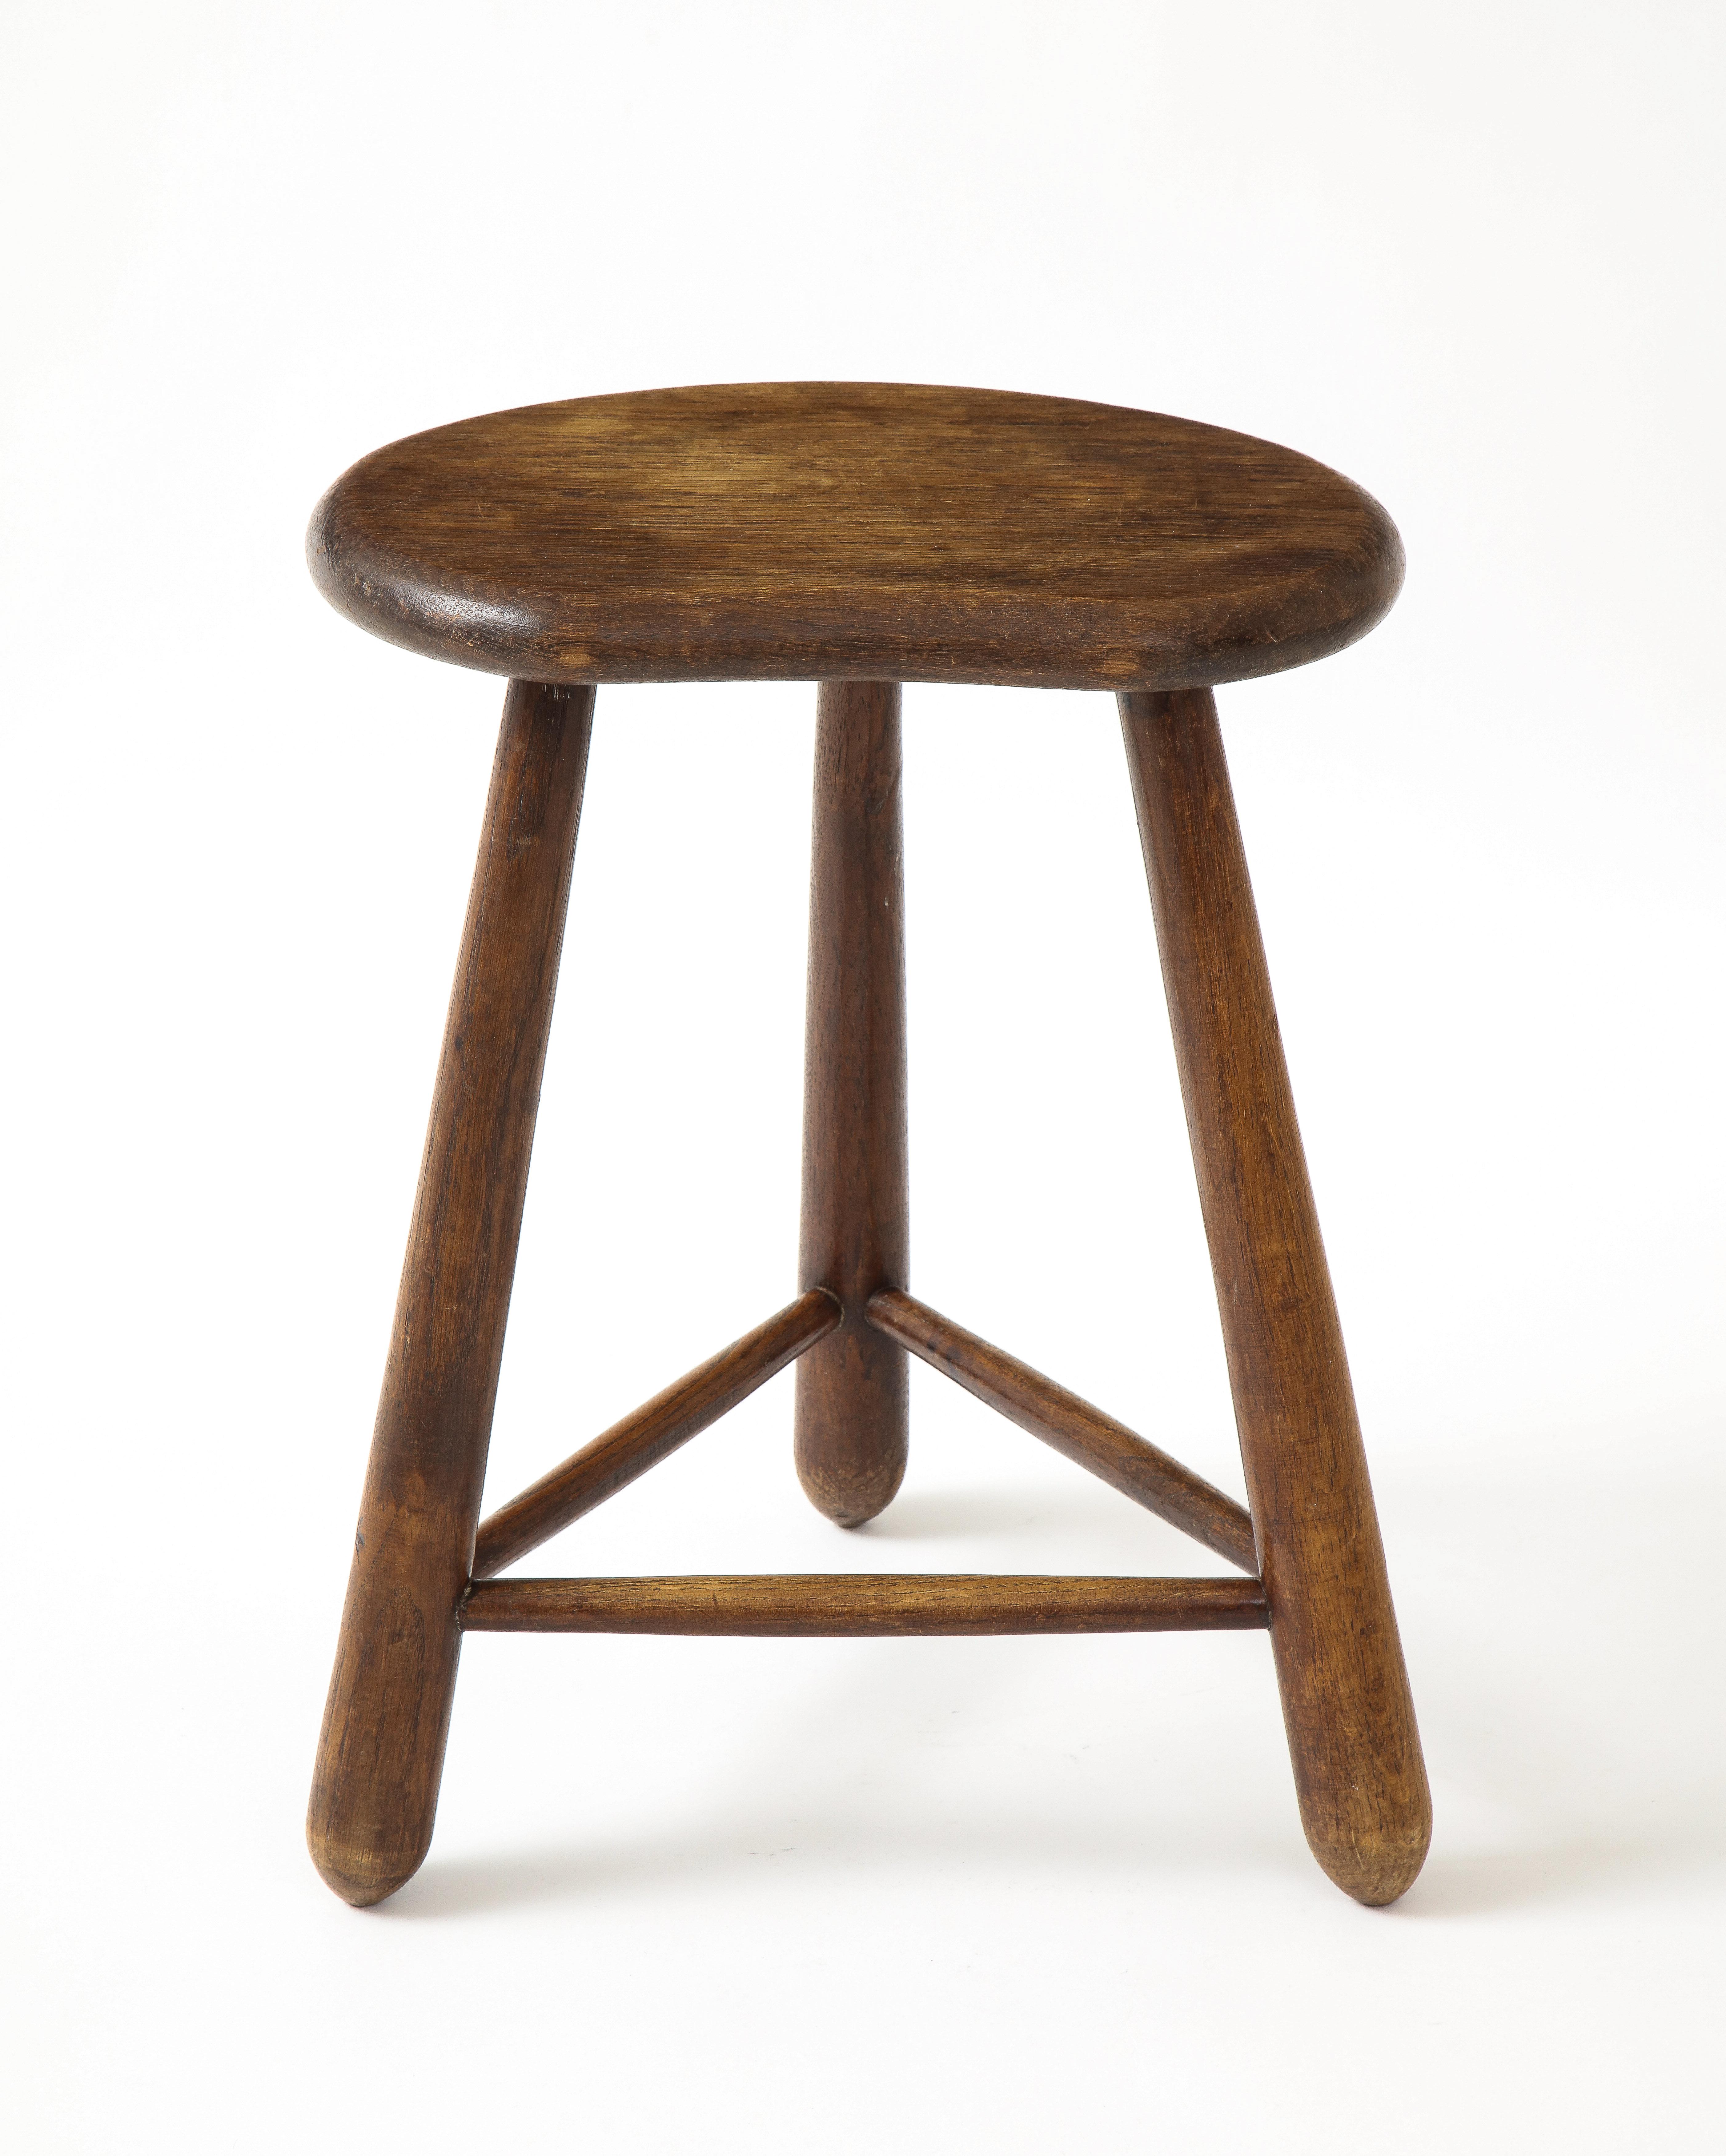 French oak stool with a curiously formed seat and support structure. Wonderful patina. Beautifully rounded edges. Hand-made.